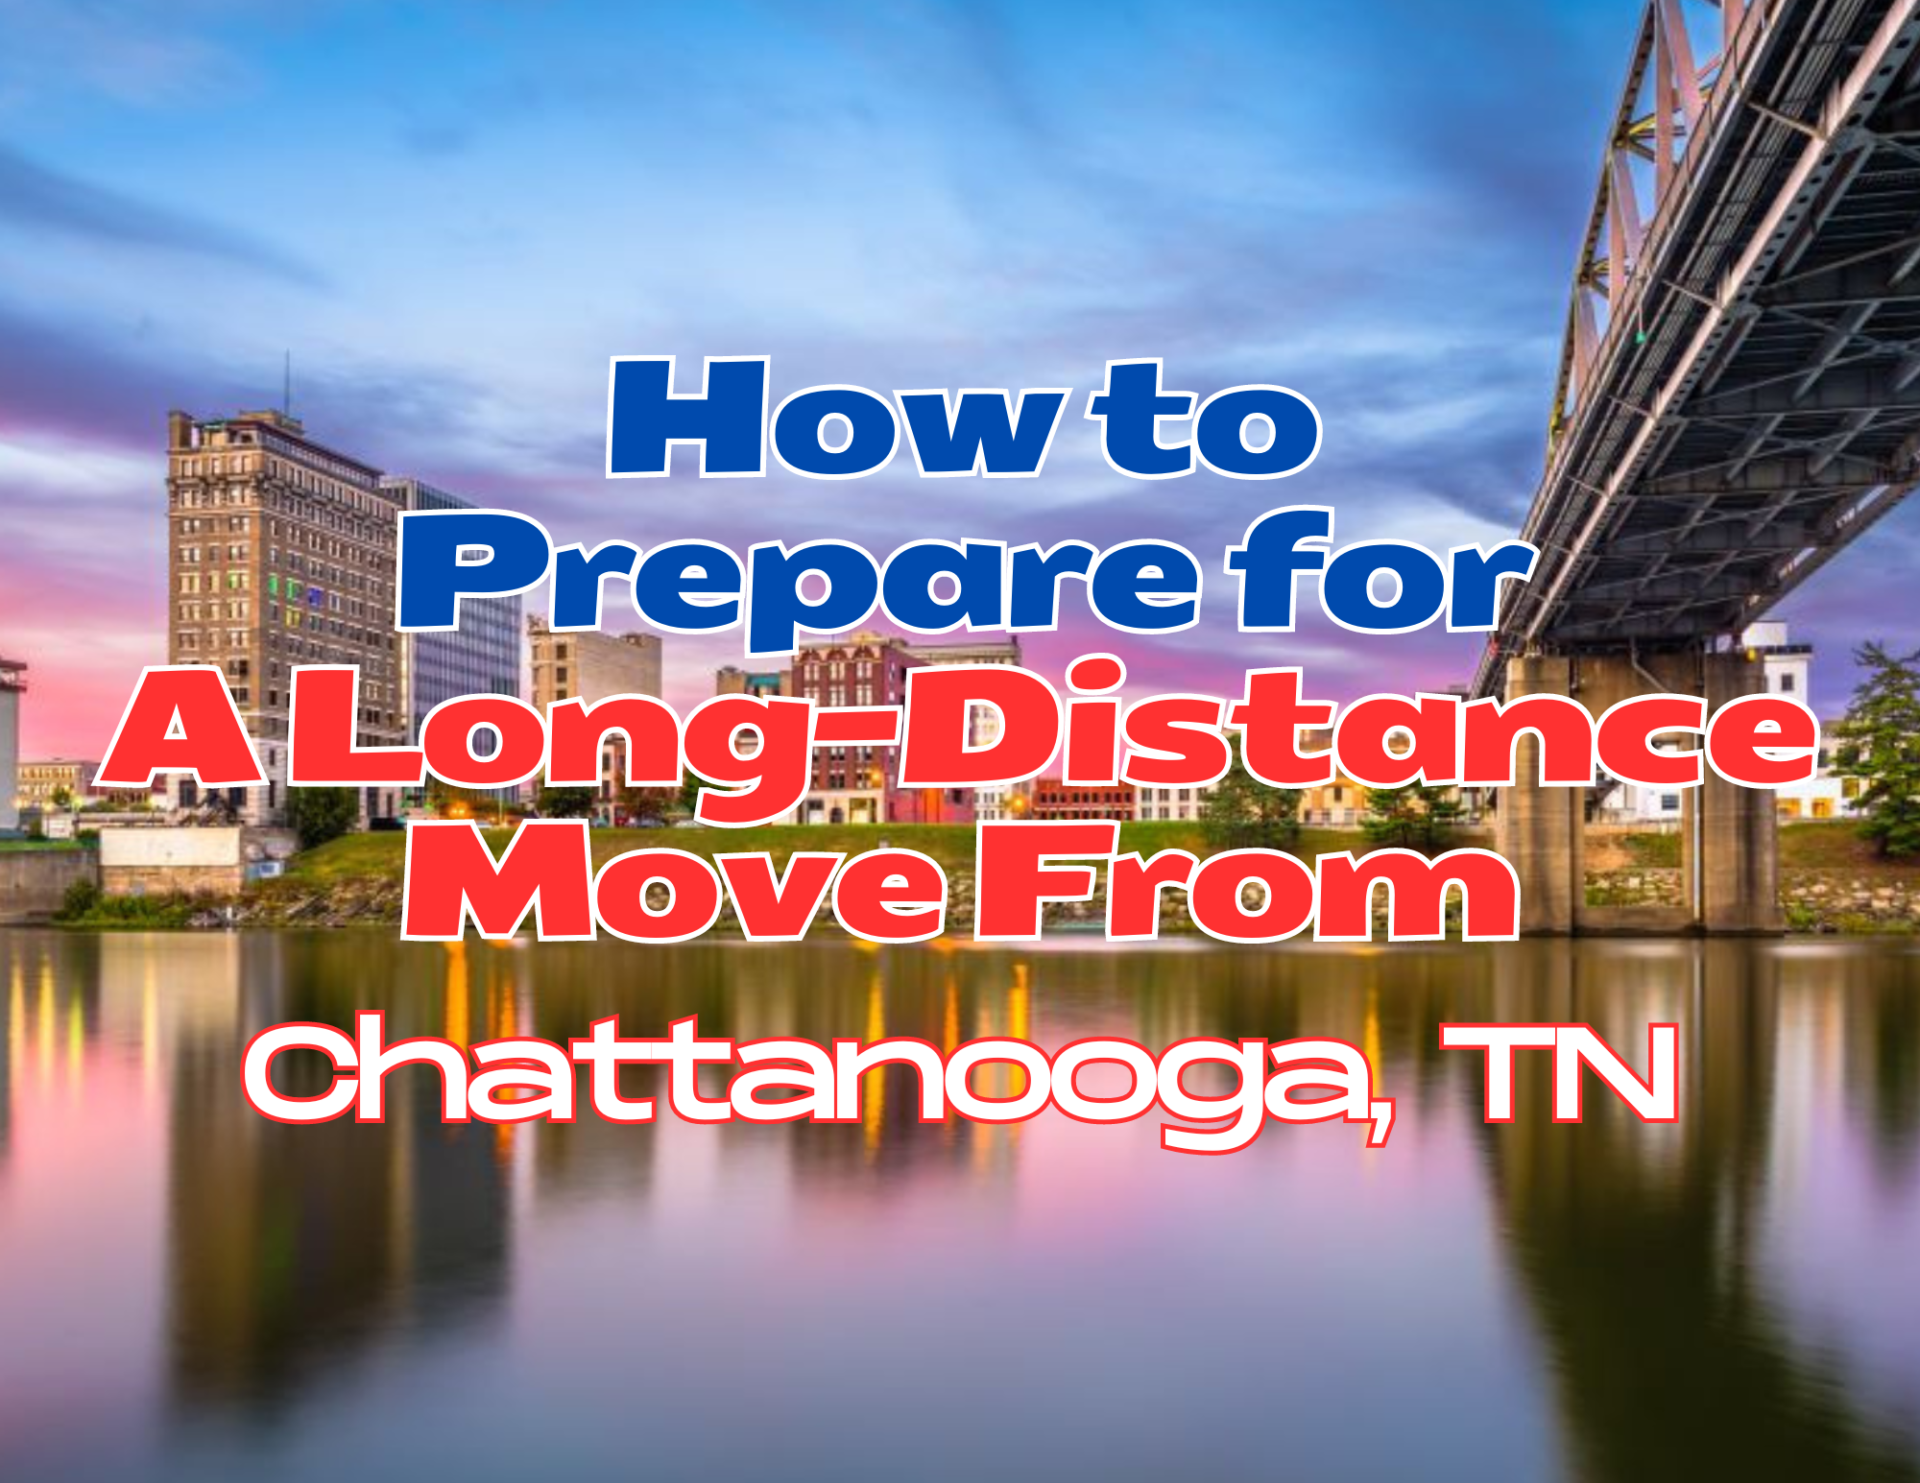 White Modern Coming Soon Flyer Landscape 5 How to Prepare for a Long-Distance Move from Chattanooga